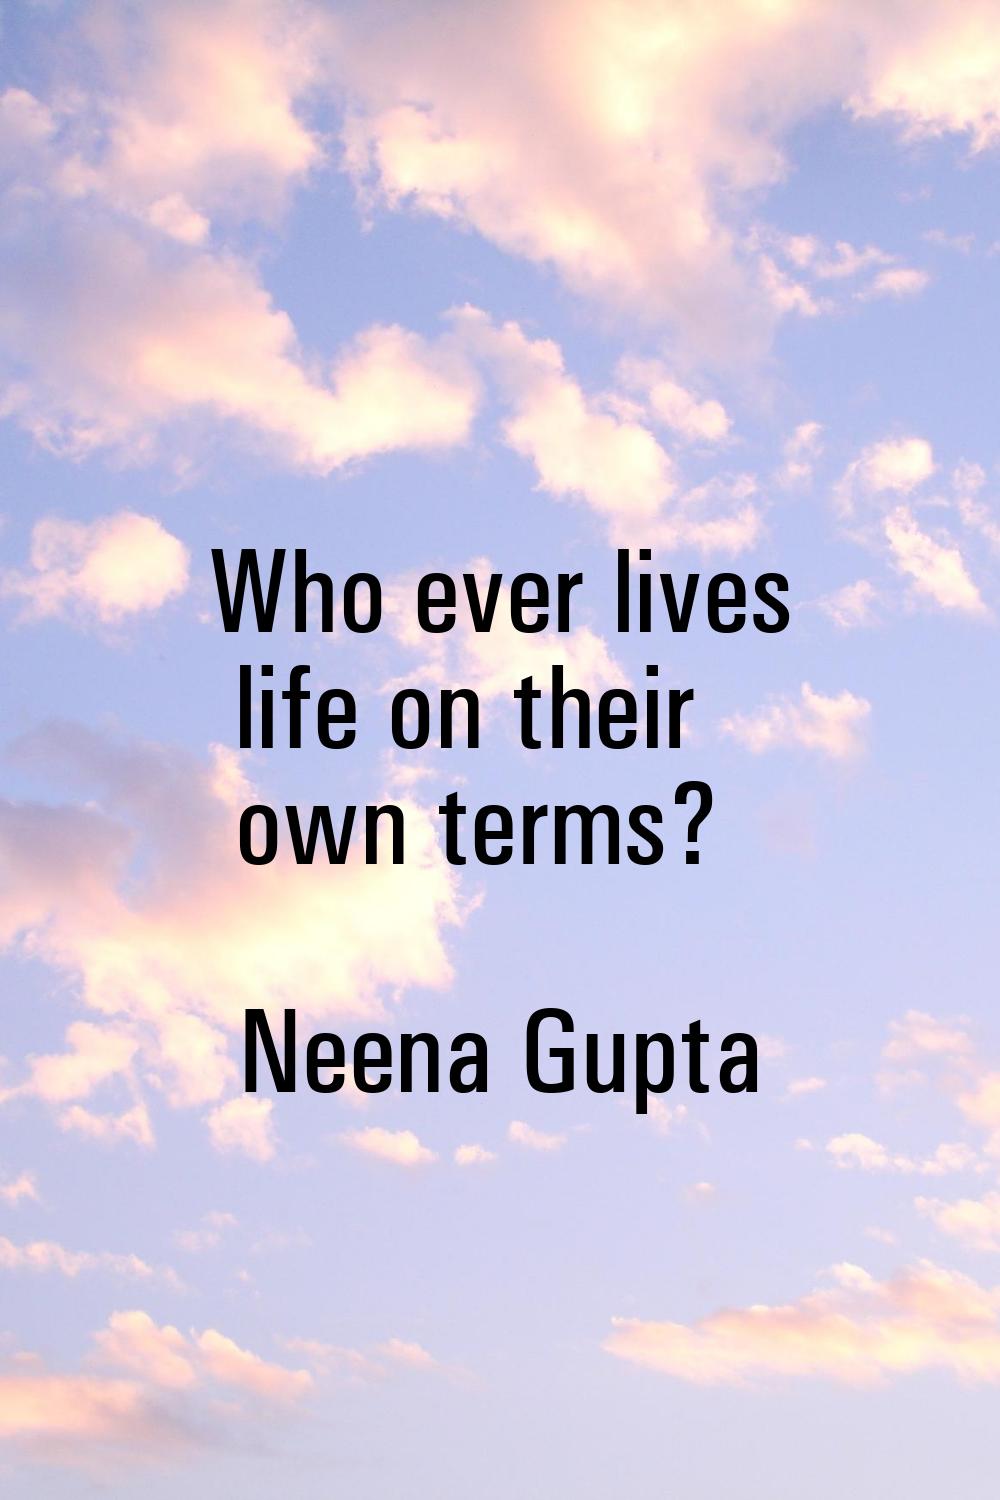 Who ever lives life on their own terms?